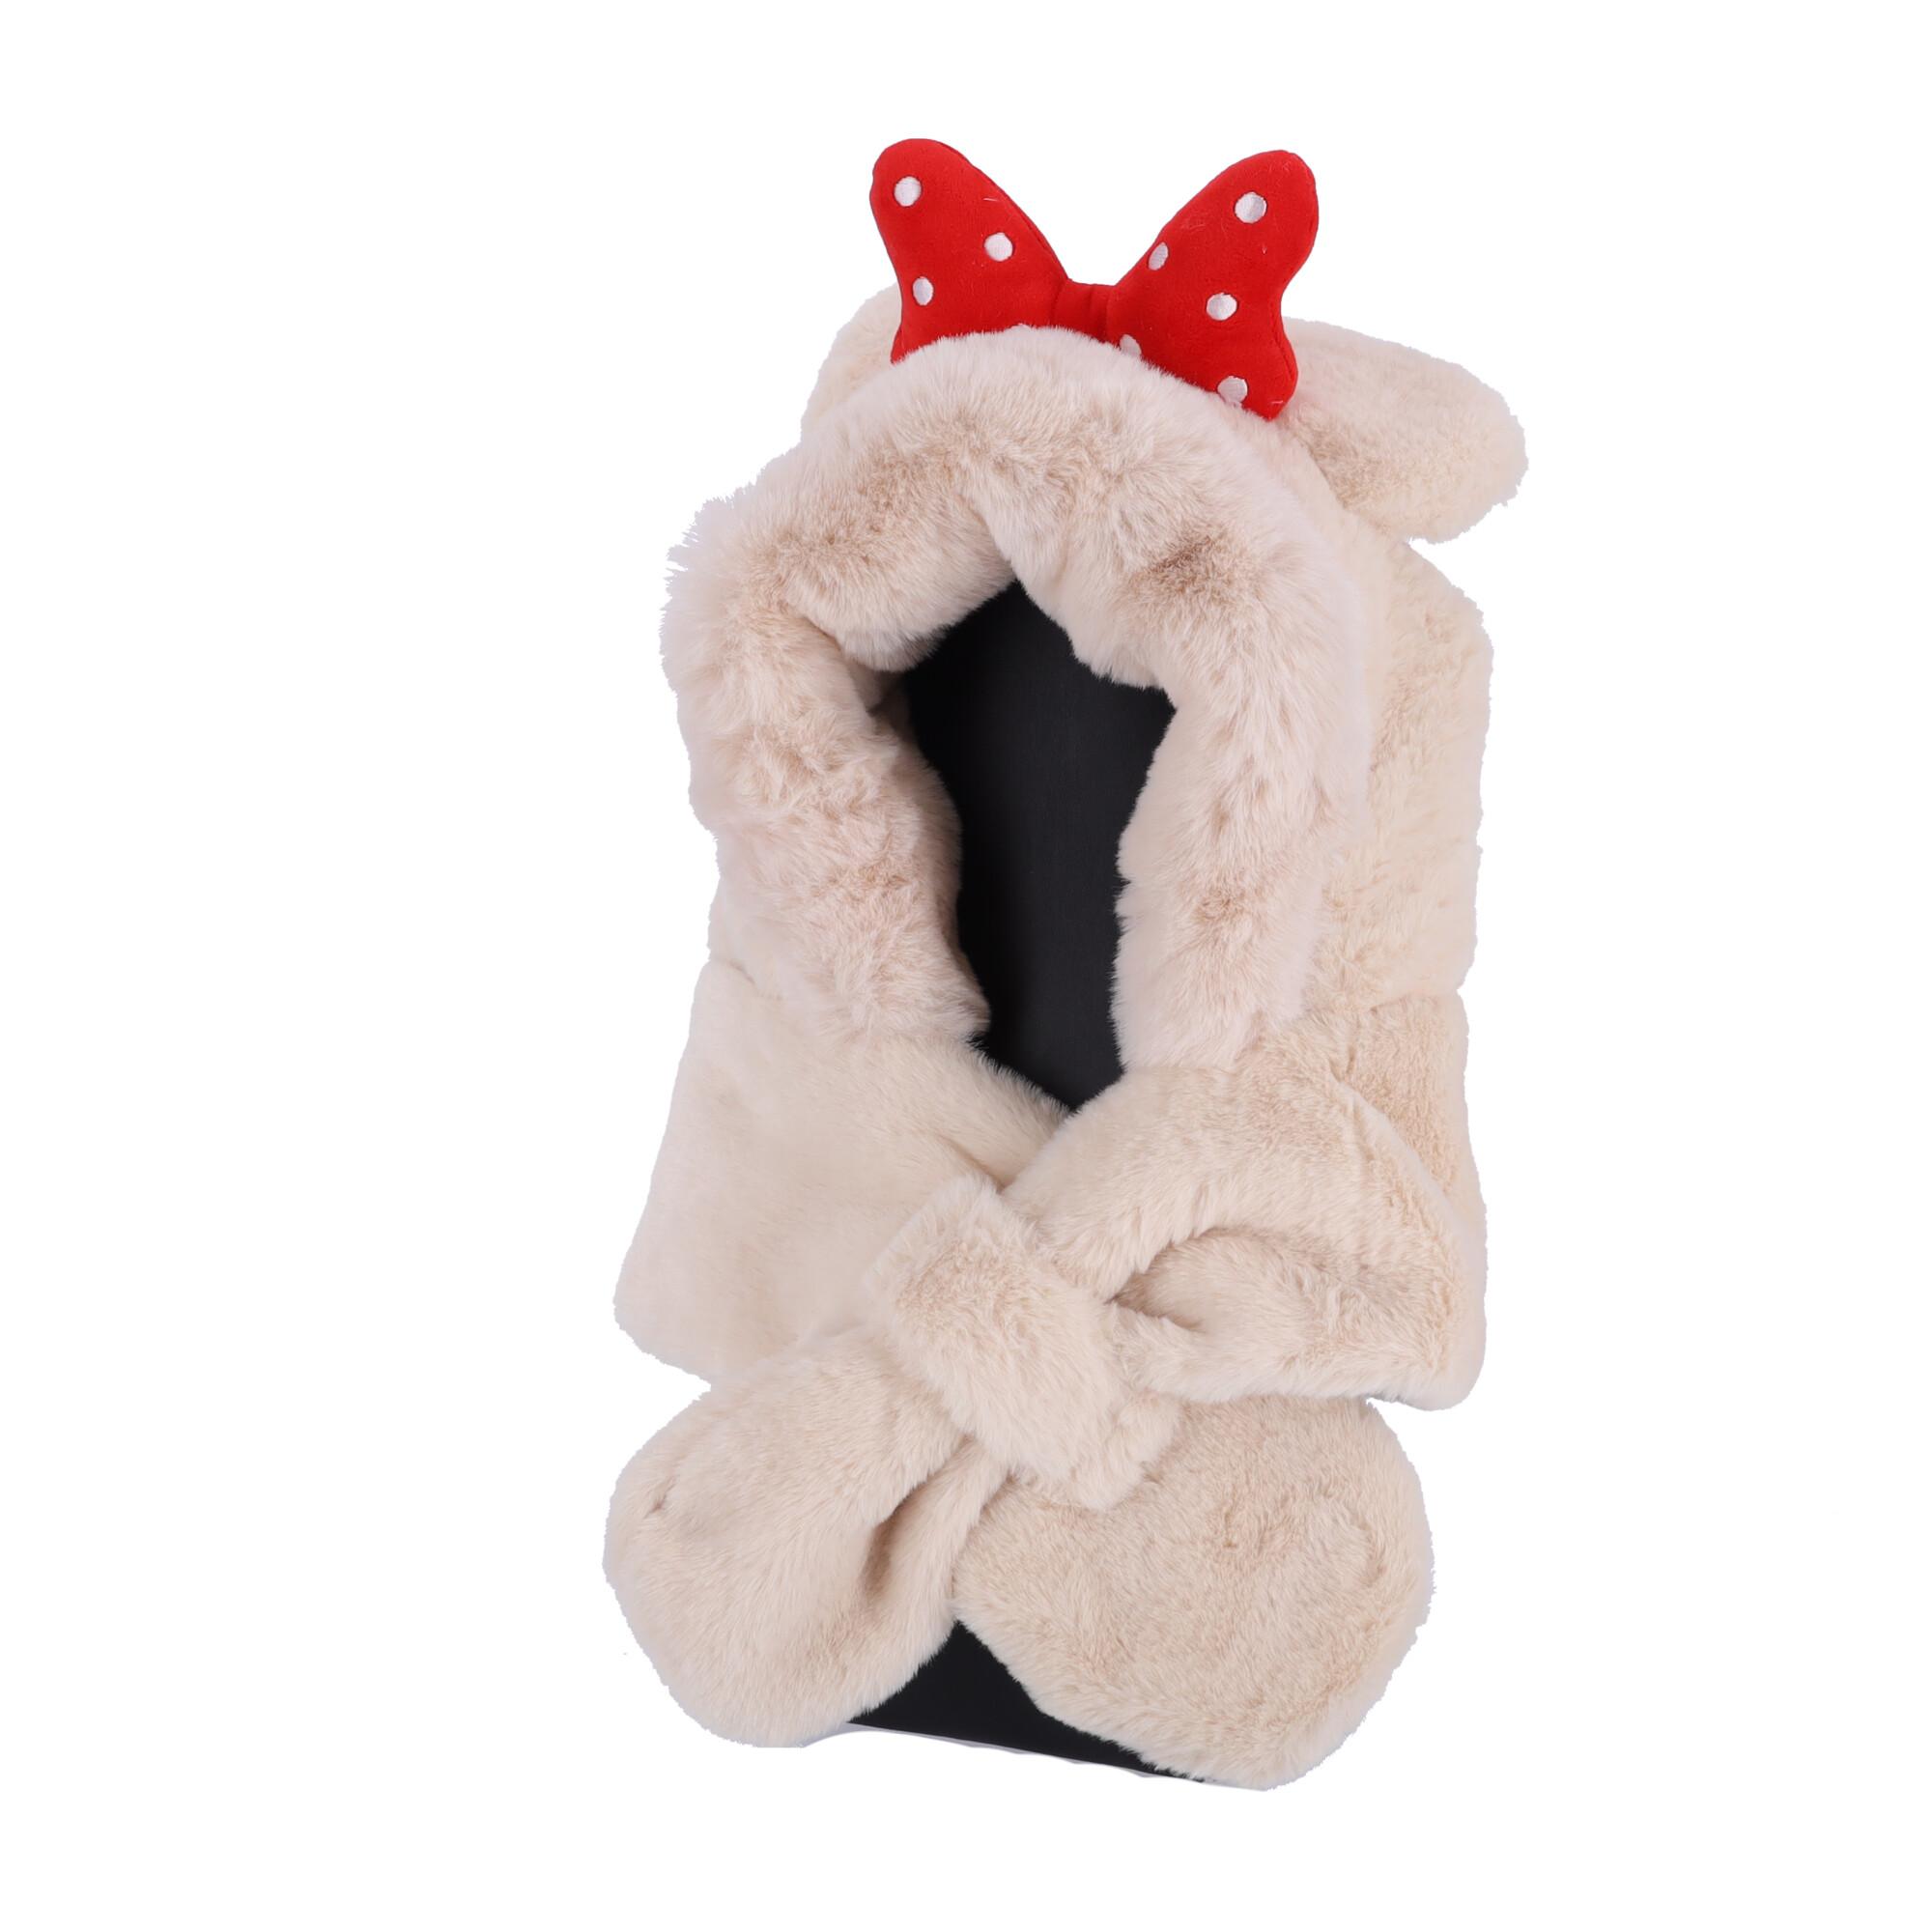 Children's plush hat with a scarf for children aged 1 to 8 - beige with a red bow